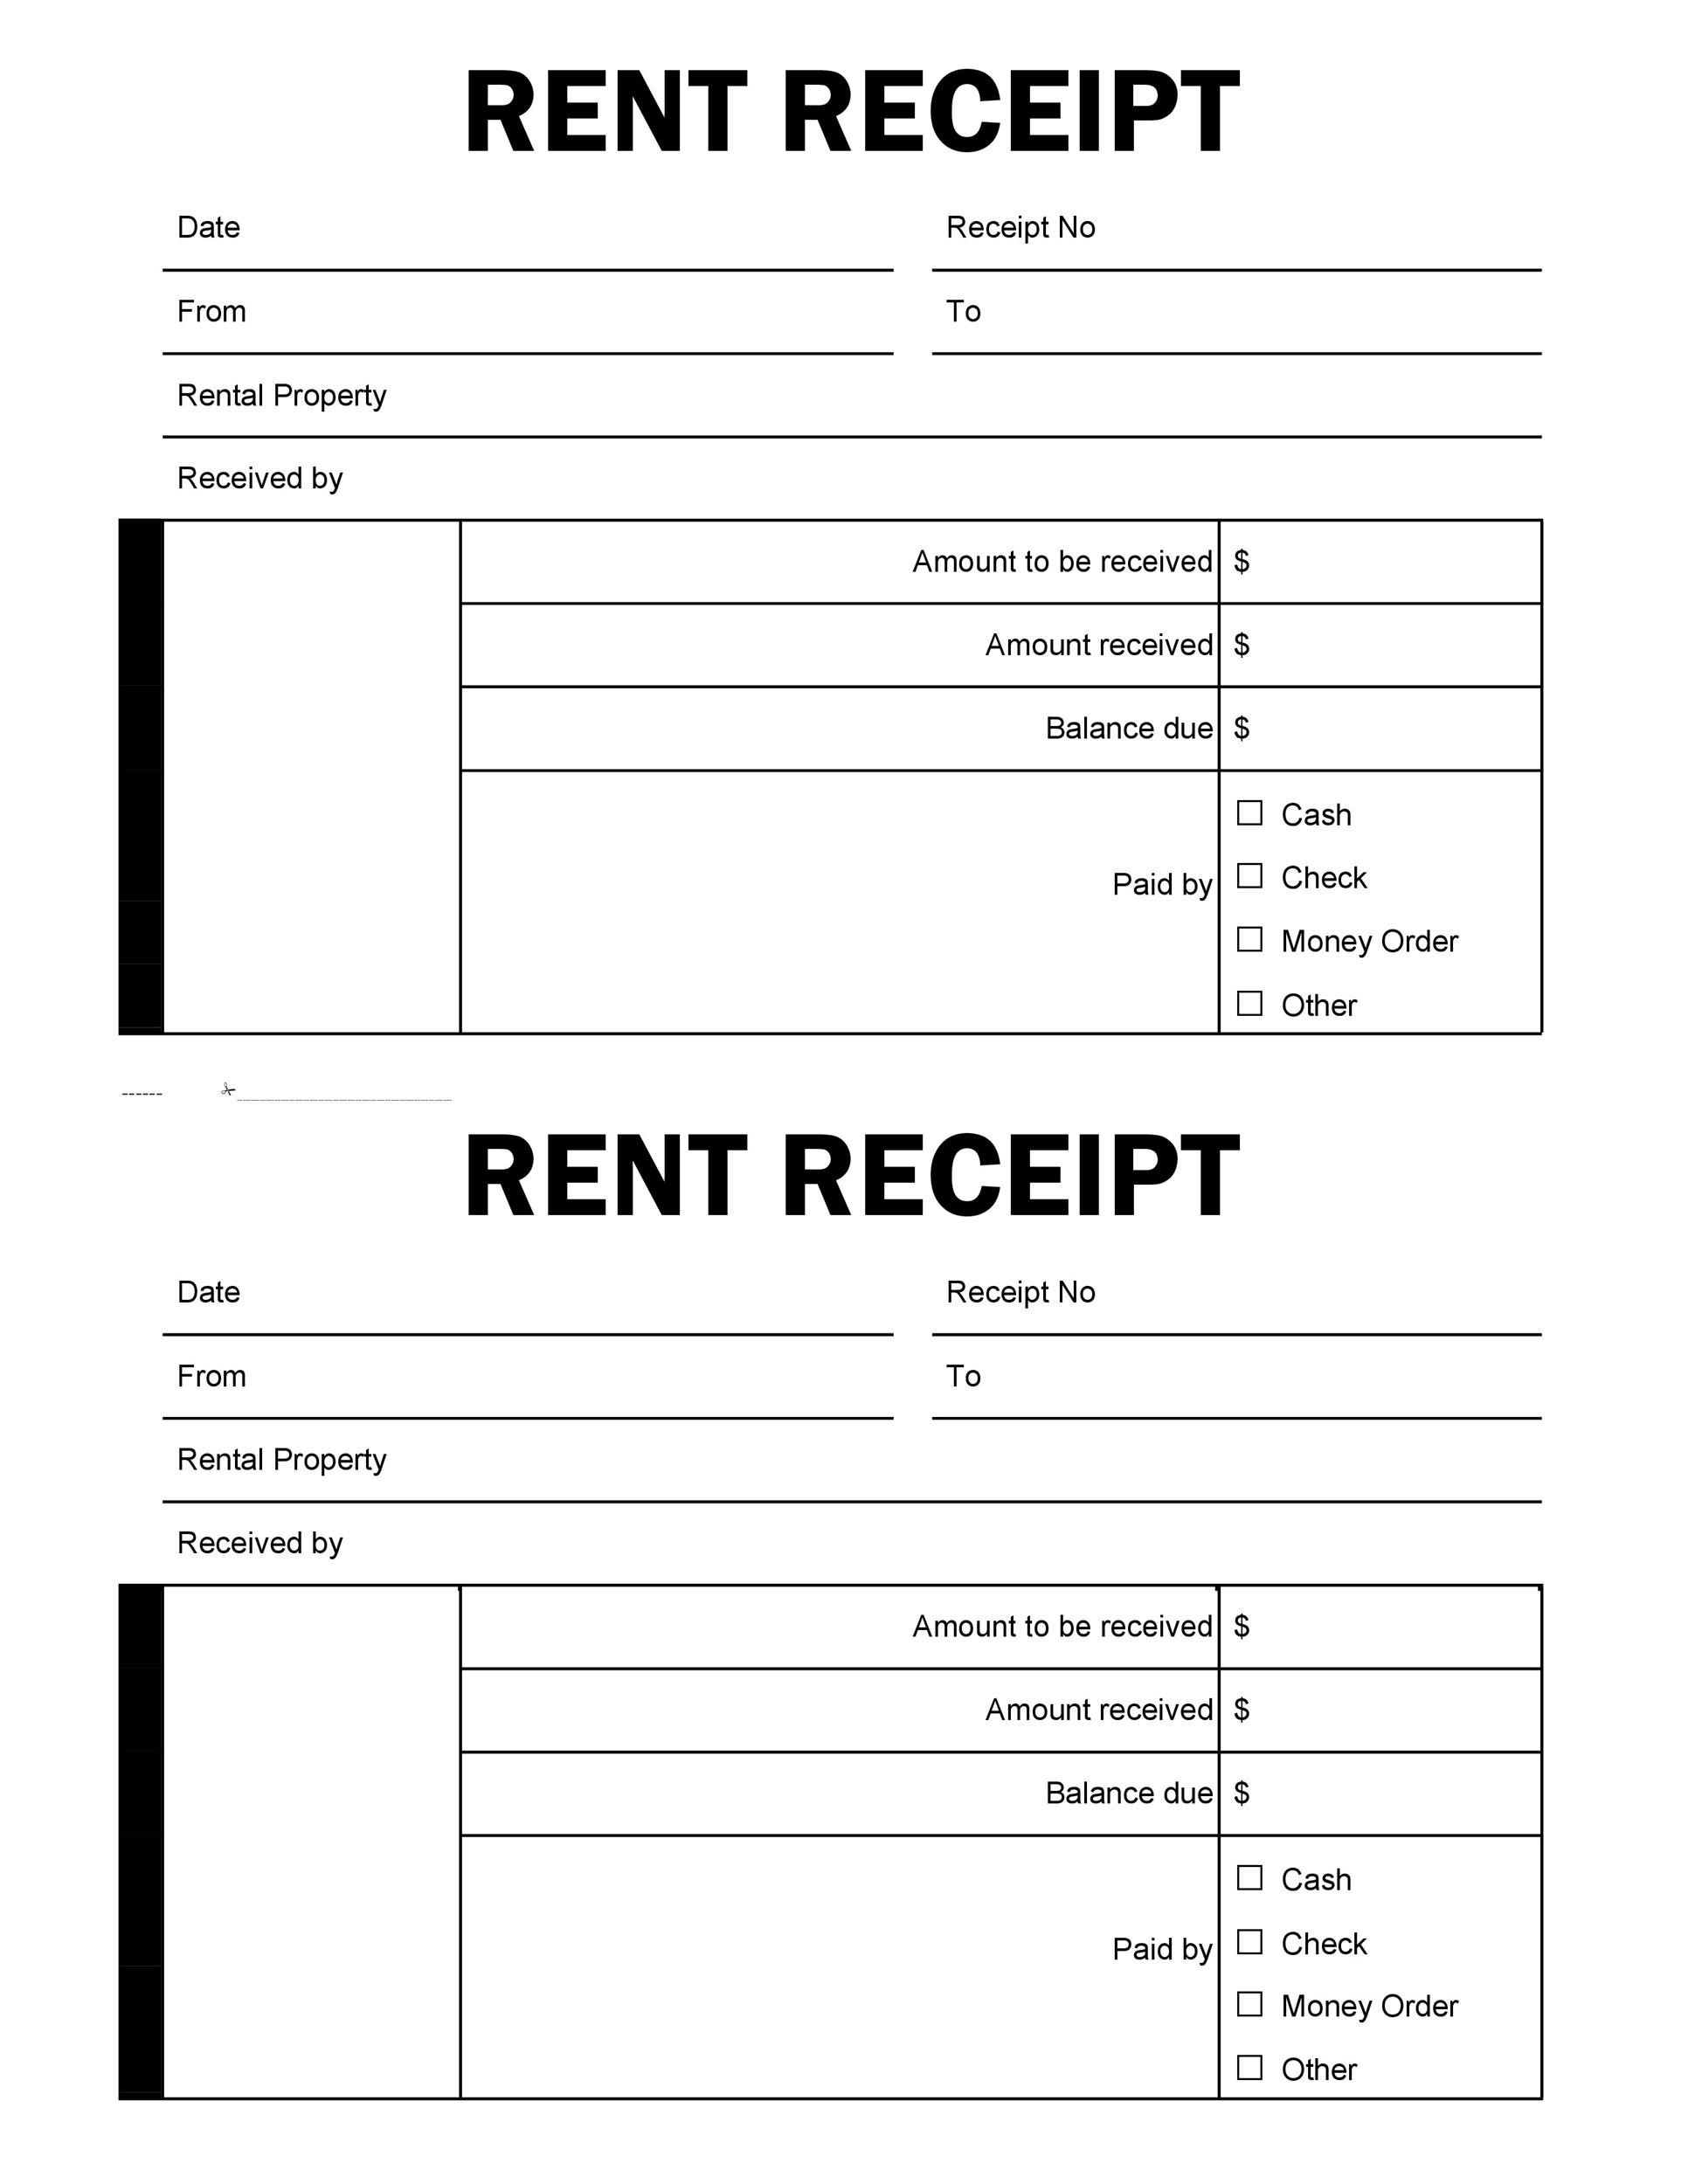 blank-receipt-sample-master-of-template-document